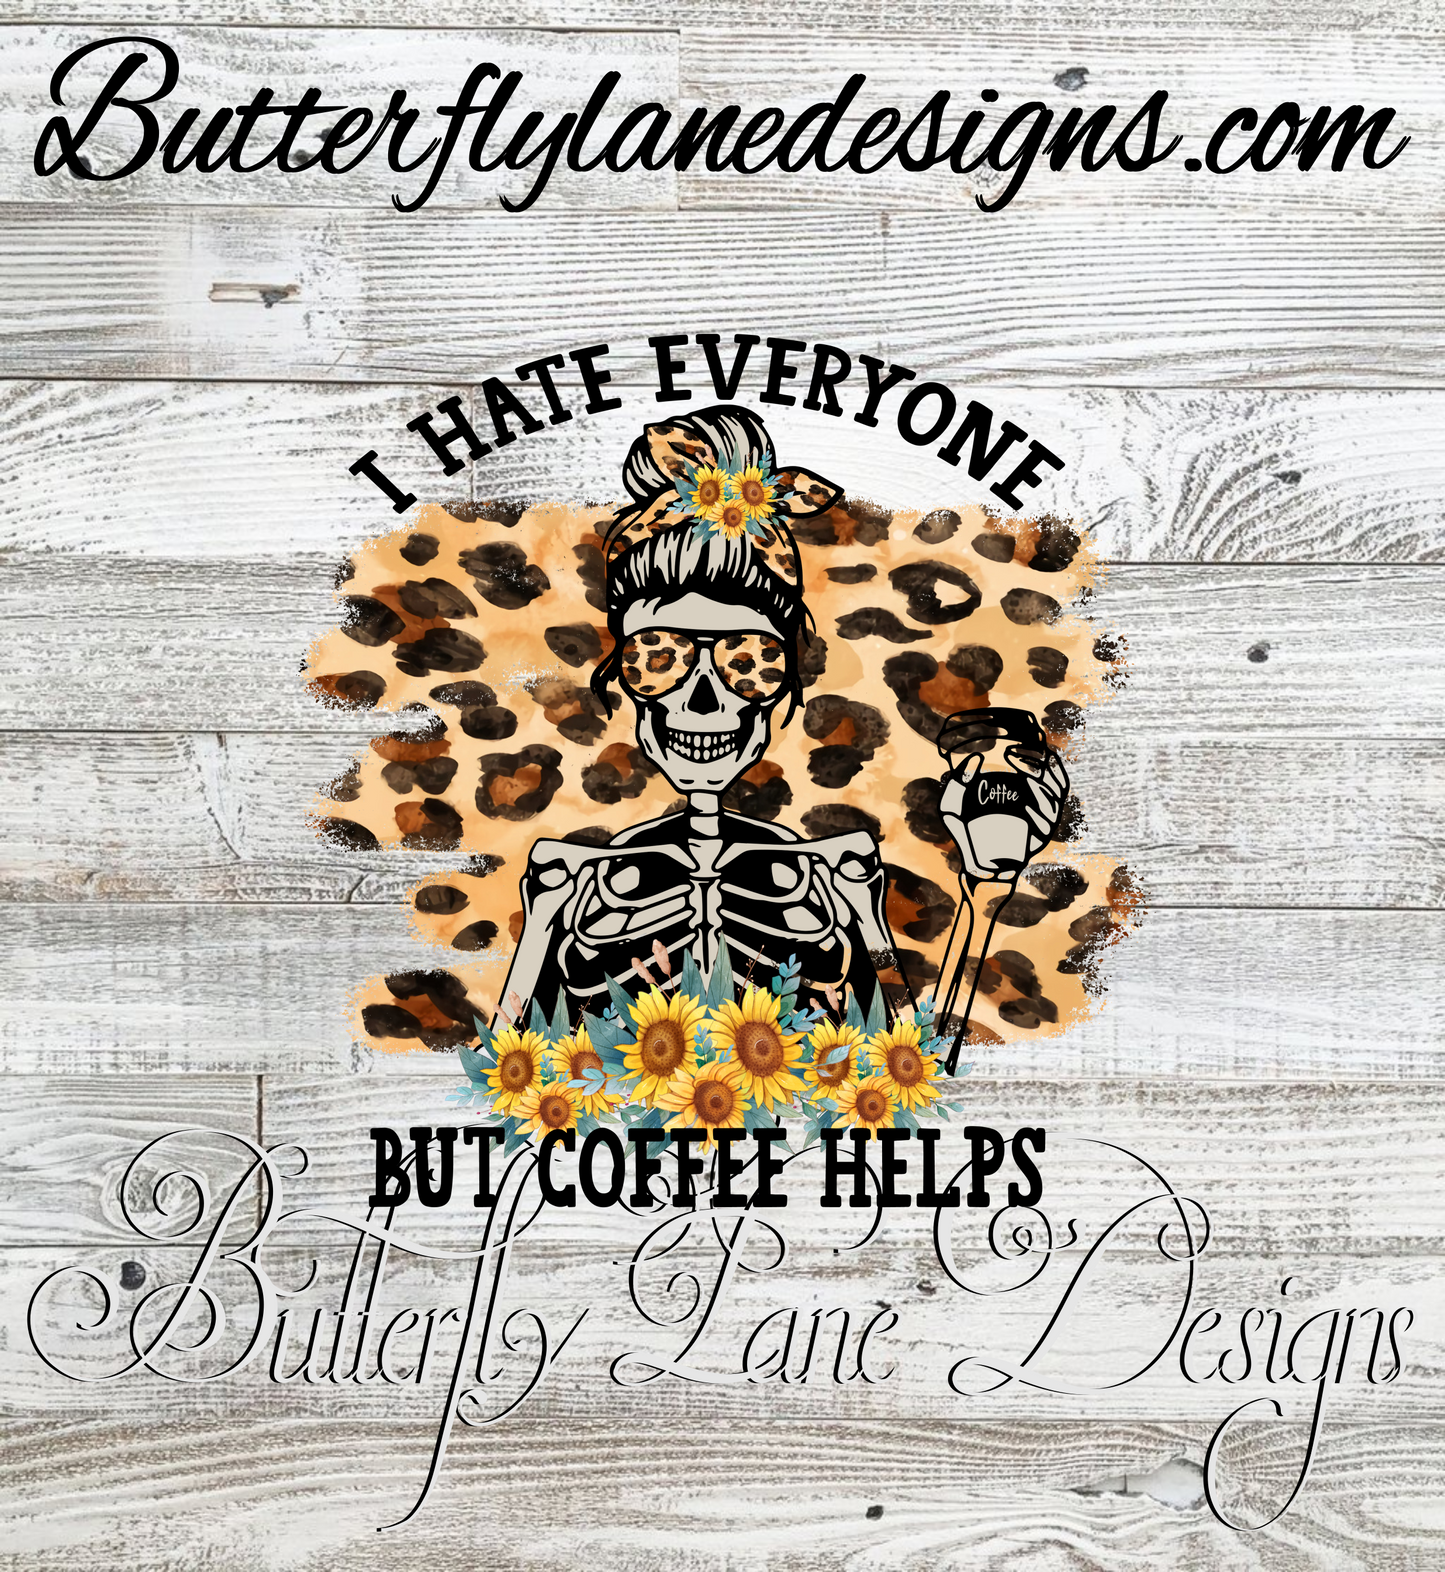 I hate everyone but coffee Helps :: Clear Decal or VCD